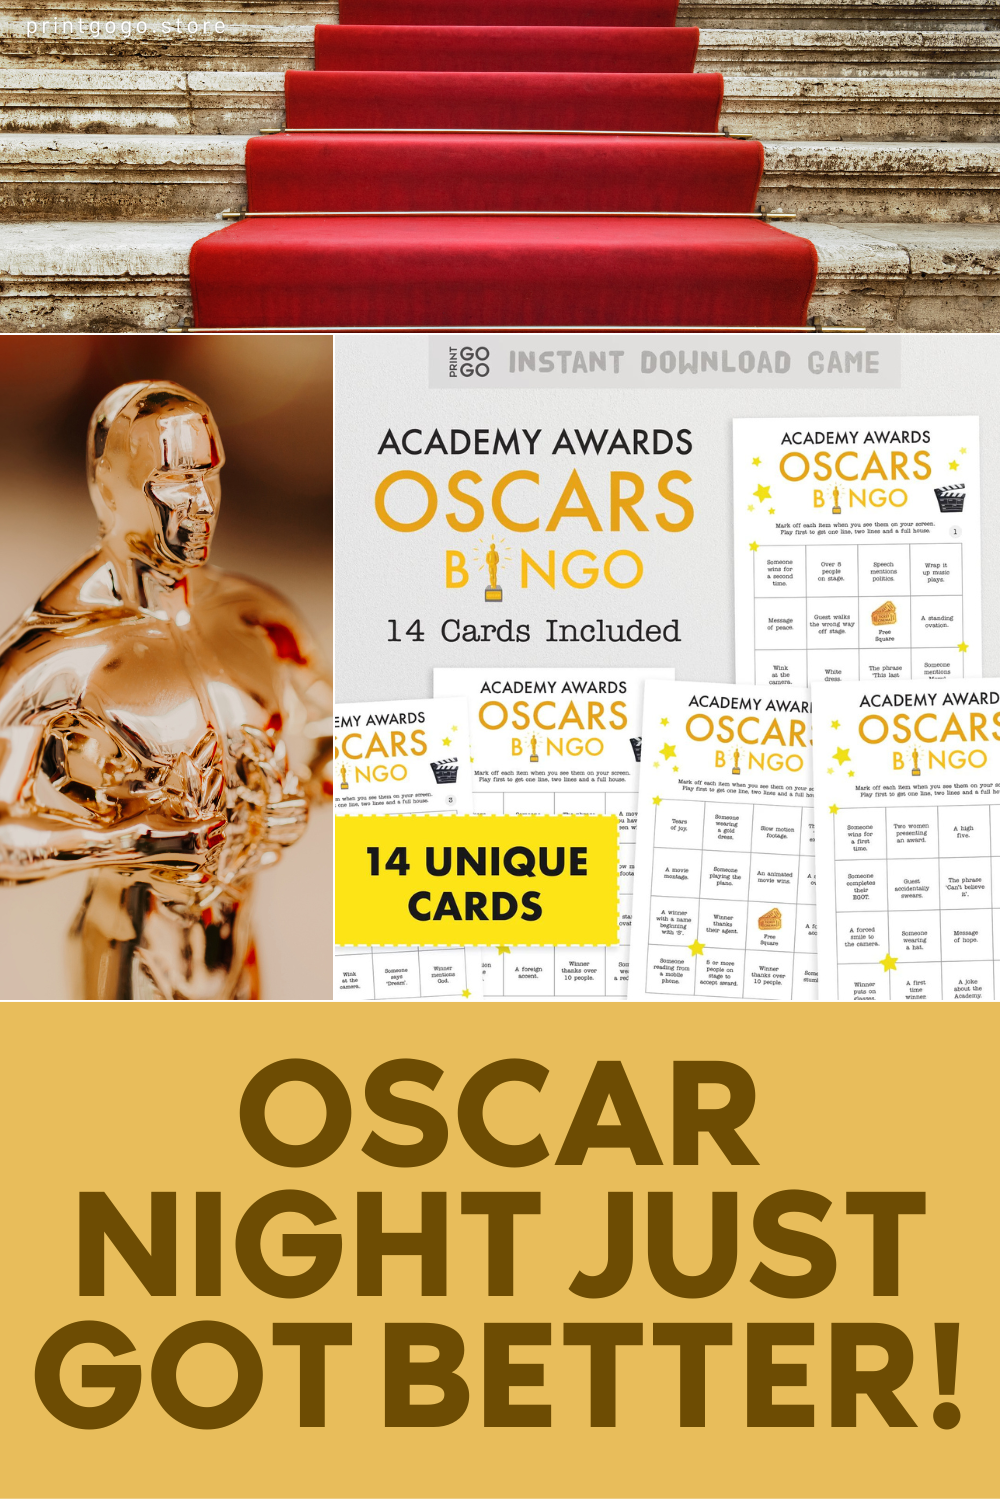 Oscar Night Just Got Better with These Bingo Cards!